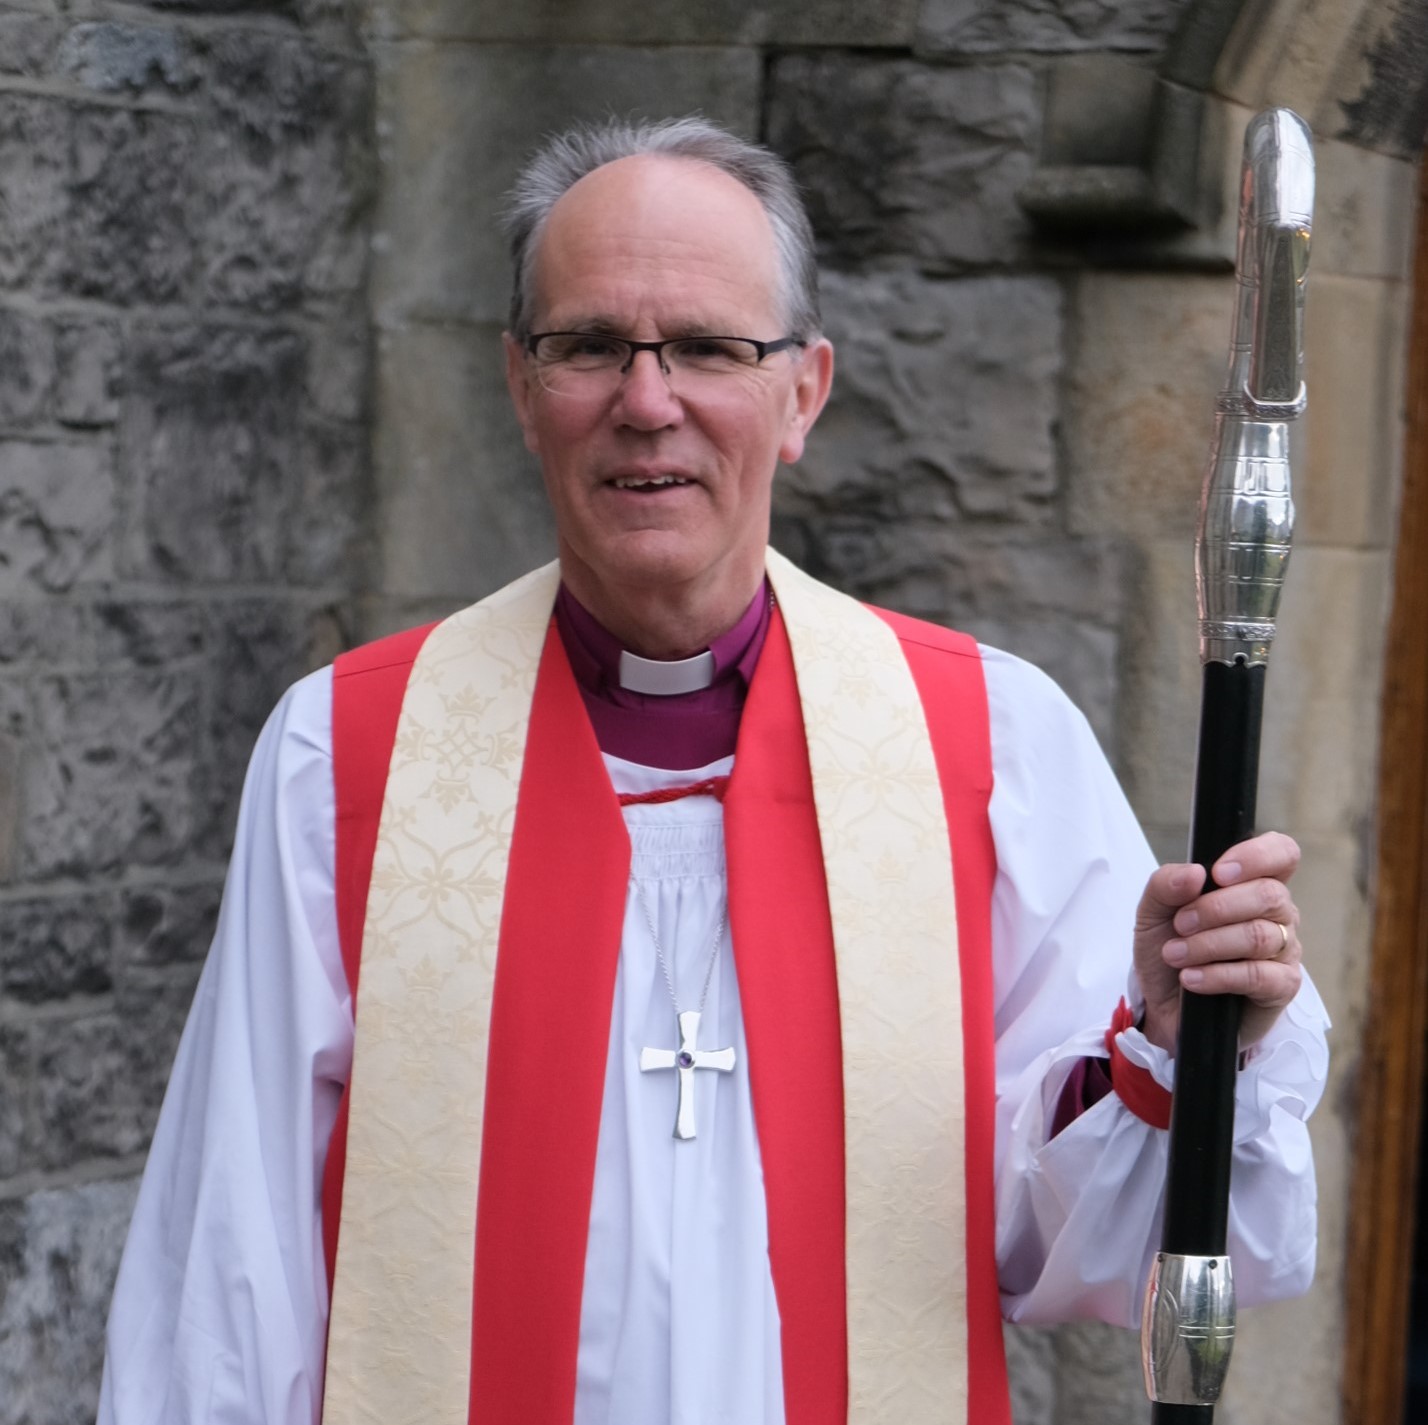 The Rt Revd Dr Ian Ellis, Bishop of Clogher.